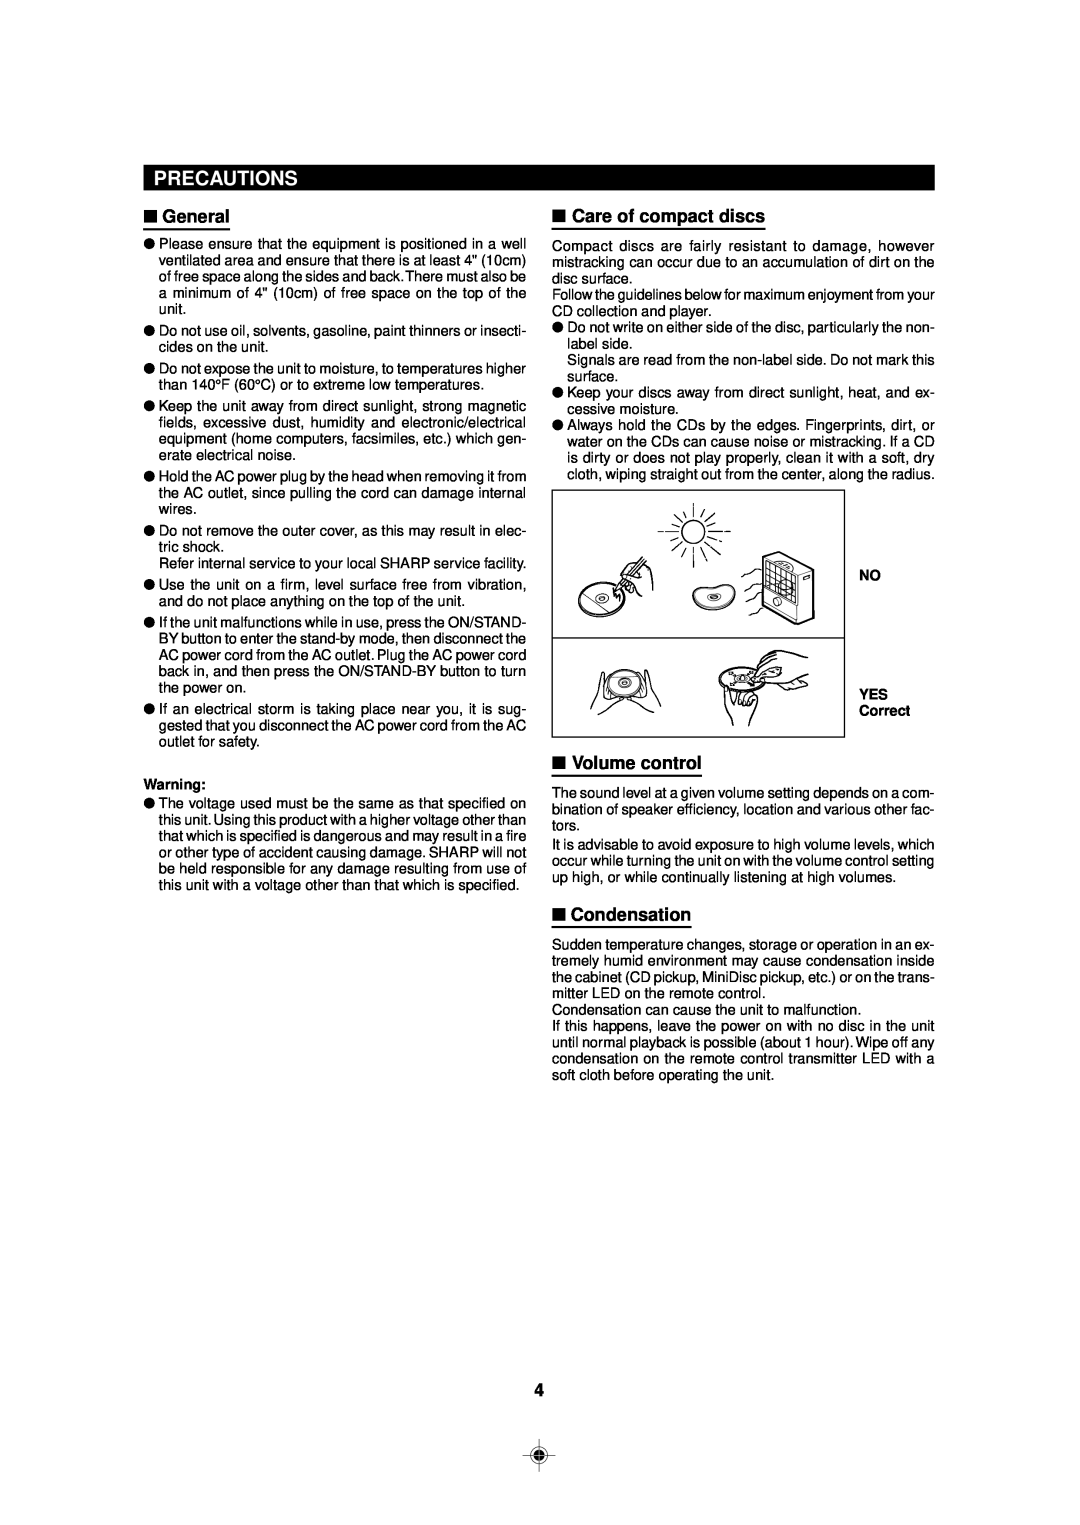 Sharp MD-MX30 operation manual Precautions, General, Care of compact discs, Volume control, Condensation 